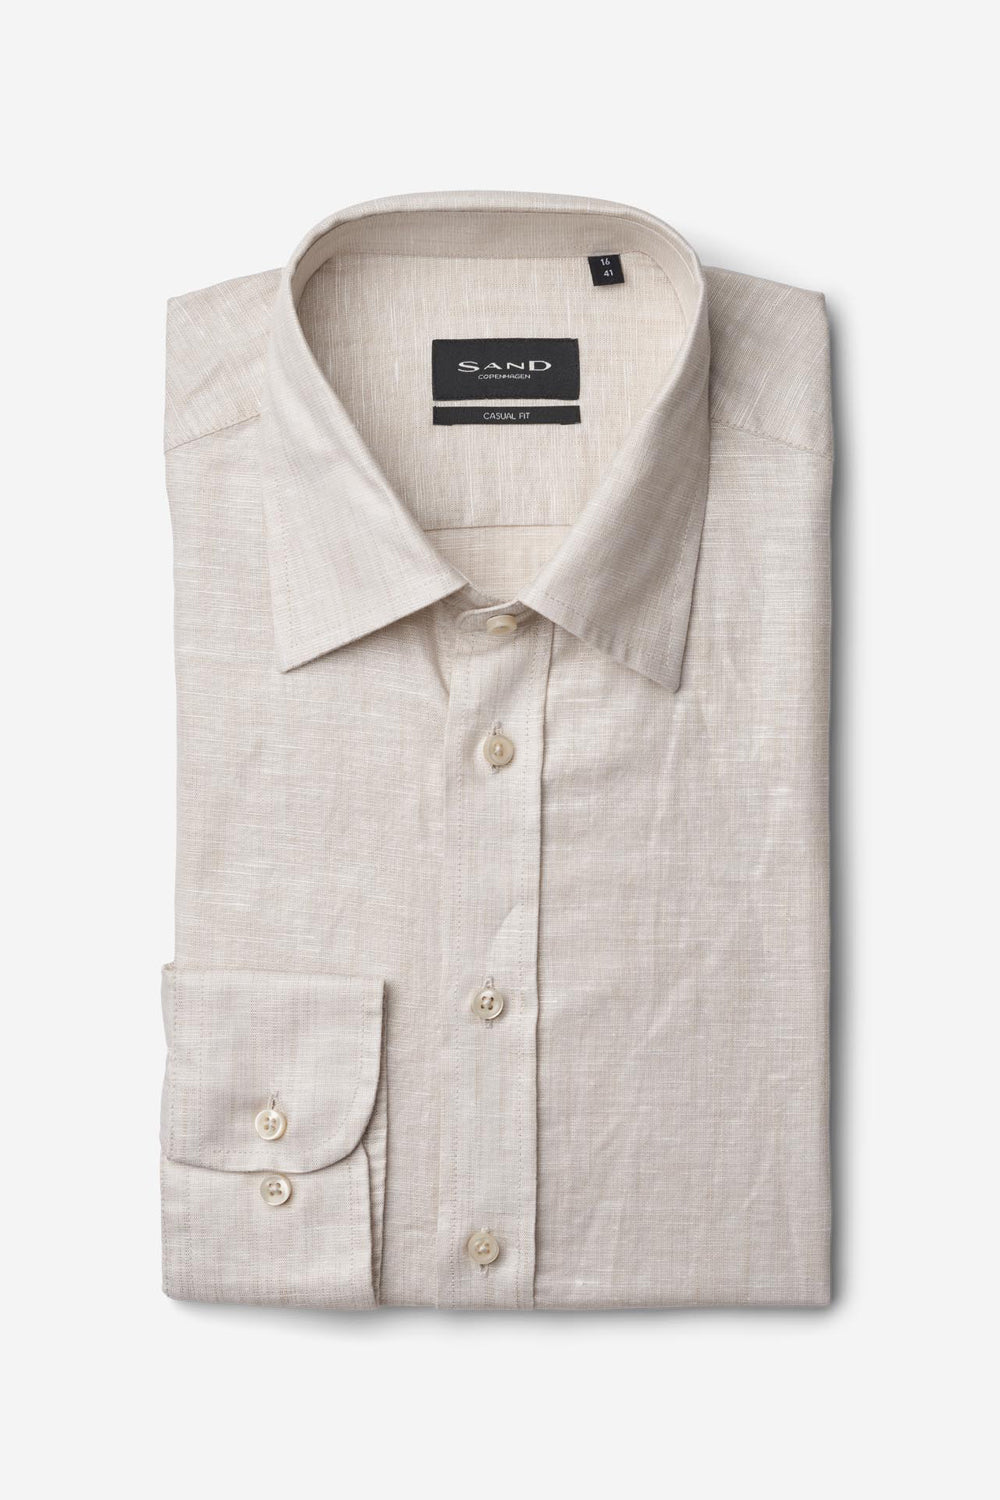 Buy the Sand Simon Linen Shirt in Sand at Intro. Spend £50 for free UK delivery. Official stockists. We ship worldwide.